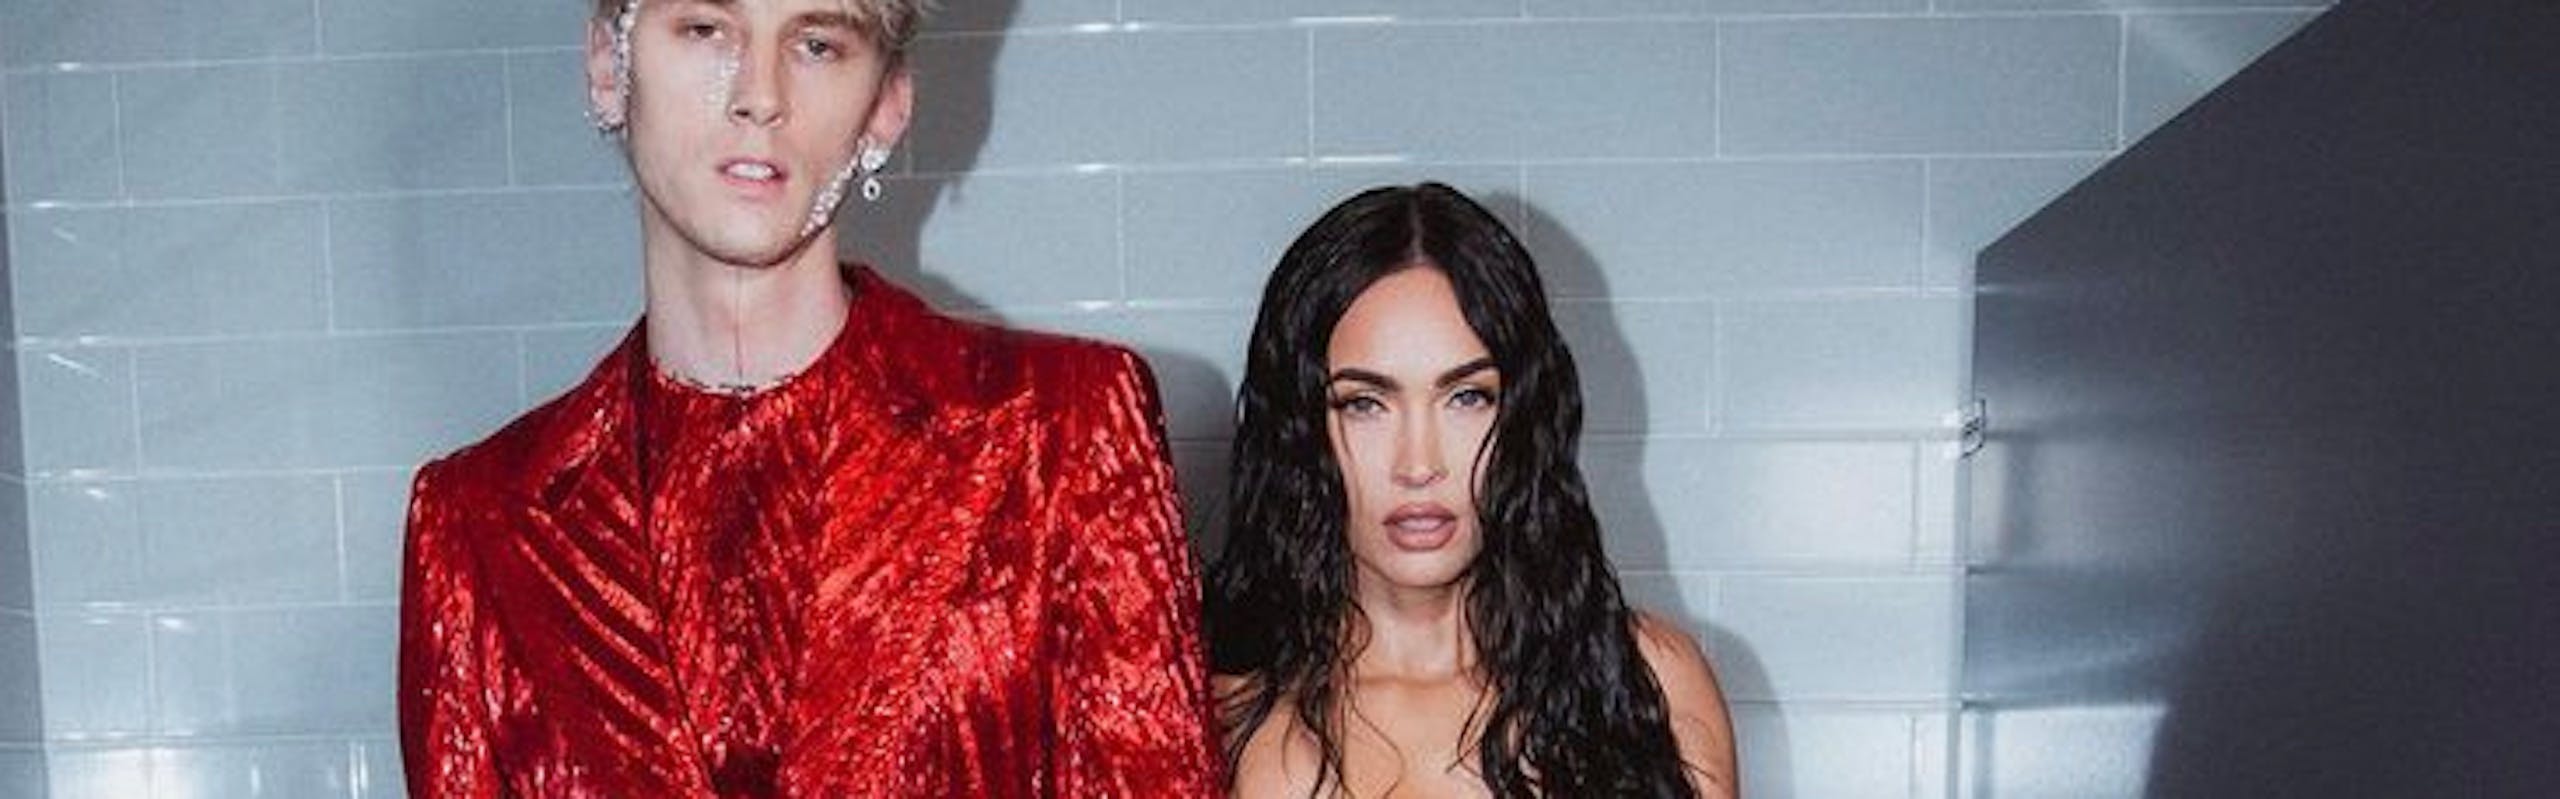 Megan Fox wears a sheer form fitting dress while standing next to fiancé Machine Gun Kelly, who wears a red sparkly suit.